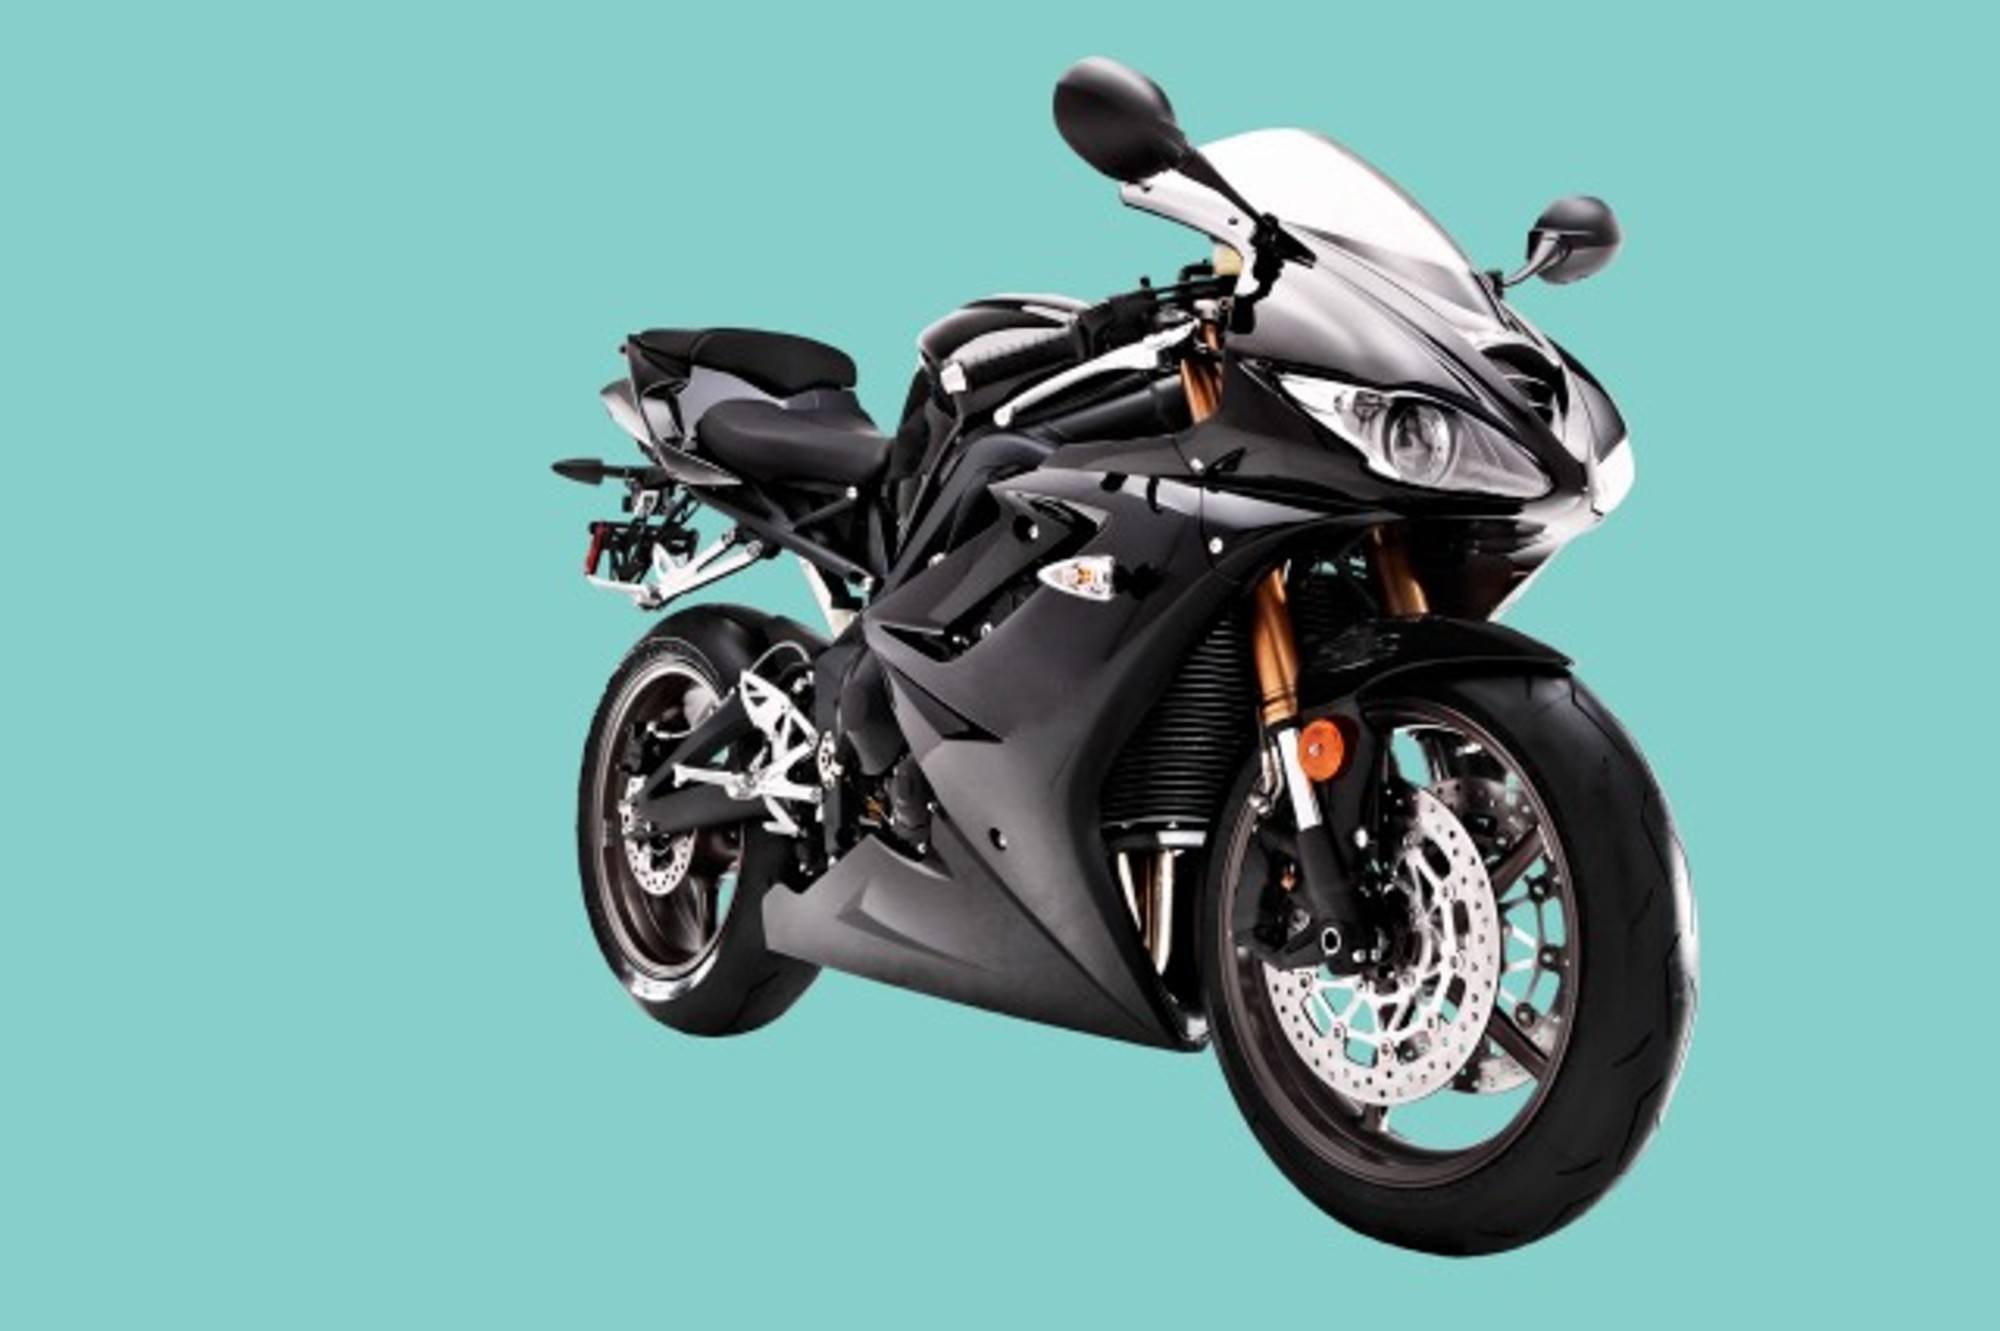 motorcycle types for beginners